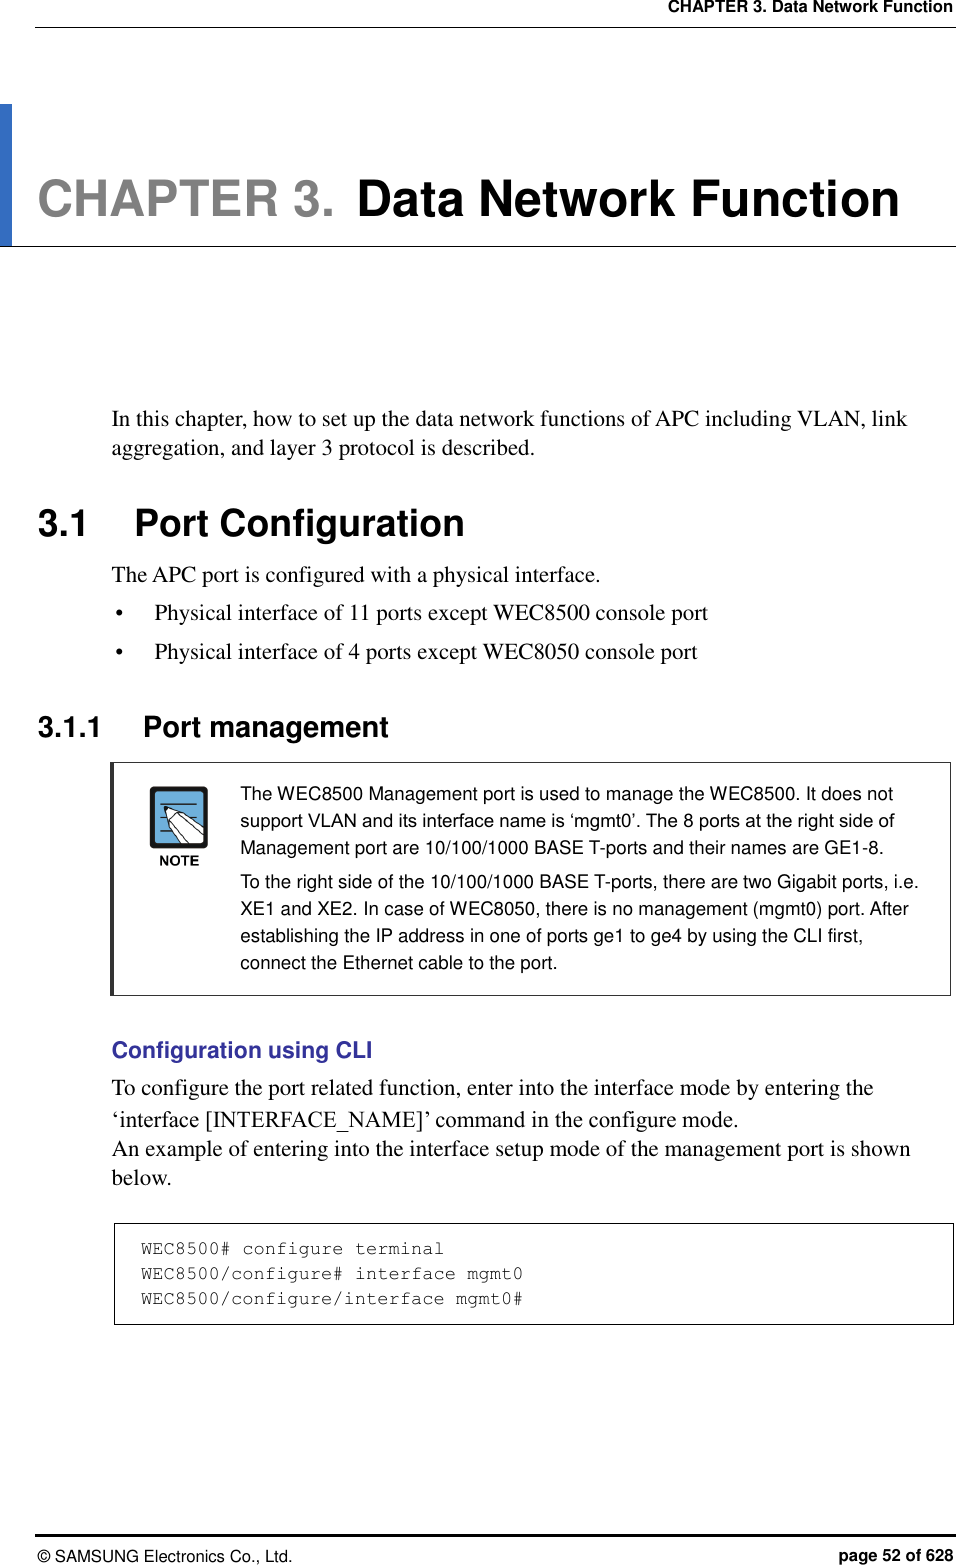 CHAPTER 3. Data Network Function ©  SAMSUNG Electronics Co., Ltd.  page 52 of 628 CHAPTER 3. Data Network Function      In this chapter, how to set up the data network functions of APC including VLAN, link aggregation, and layer 3 protocol is described.  3.1  Port Configuration The APC port is configured with a physical interface.  Physical interface of 11 ports except WEC8500 console port  Physical interface of 4 ports except WEC8050 console port  3.1.1  Port management   The WEC8500 Management port is used to manage the WEC8500. It does not support VLAN and its interface name is ‘mgmt0’. The 8 ports at the right side of Management port are 10/100/1000 BASE T-ports and their names are GE1-8.     To the right side of the 10/100/1000 BASE T-ports, there are two Gigabit ports, i.e. XE1 and XE2. In case of WEC8050, there is no management (mgmt0) port. After establishing the IP address in one of ports ge1 to ge4 by using the CLI first, connect the Ethernet cable to the port.  Configuration using CLI To configure the port related function, enter into the interface mode by entering the ‘interface [INTERFACE_NAME]’ command in the configure mode. An example of entering into the interface setup mode of the management port is shown below.  WEC8500# configure terminal WEC8500/configure# interface mgmt0 WEC8500/configure/interface mgmt0#  